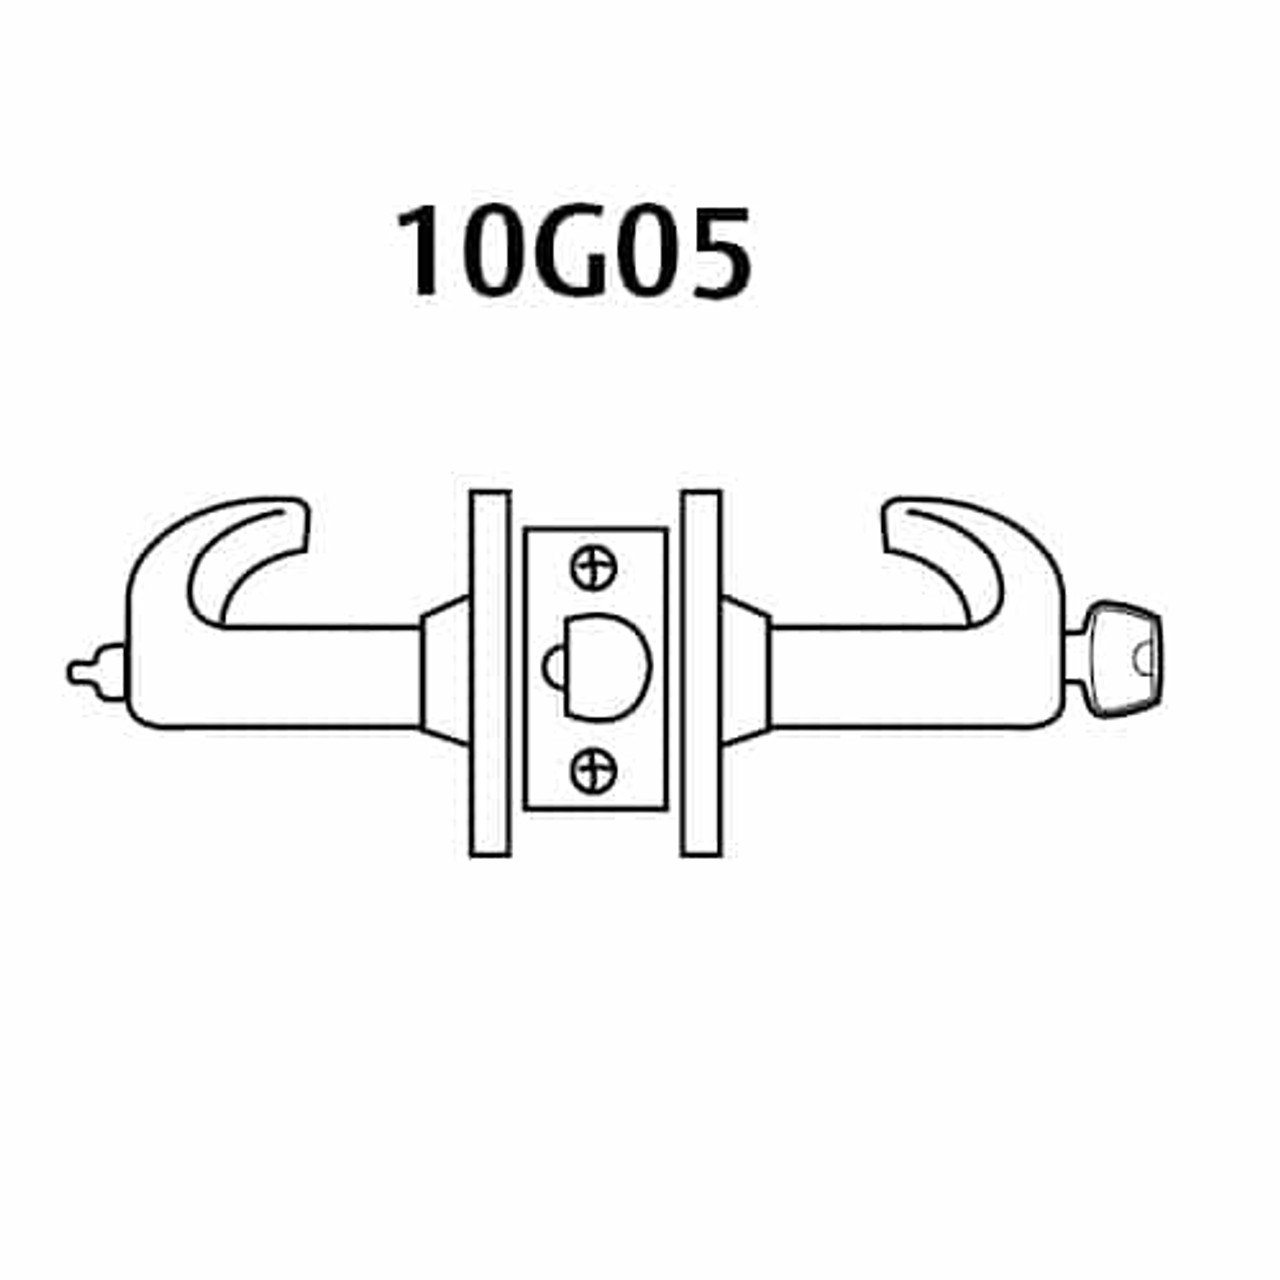 28-10G05-LJ-04 Sargent 10 Line Cylindrical Entry/Office Locks with J Lever Design and L Rose in Satin Brass